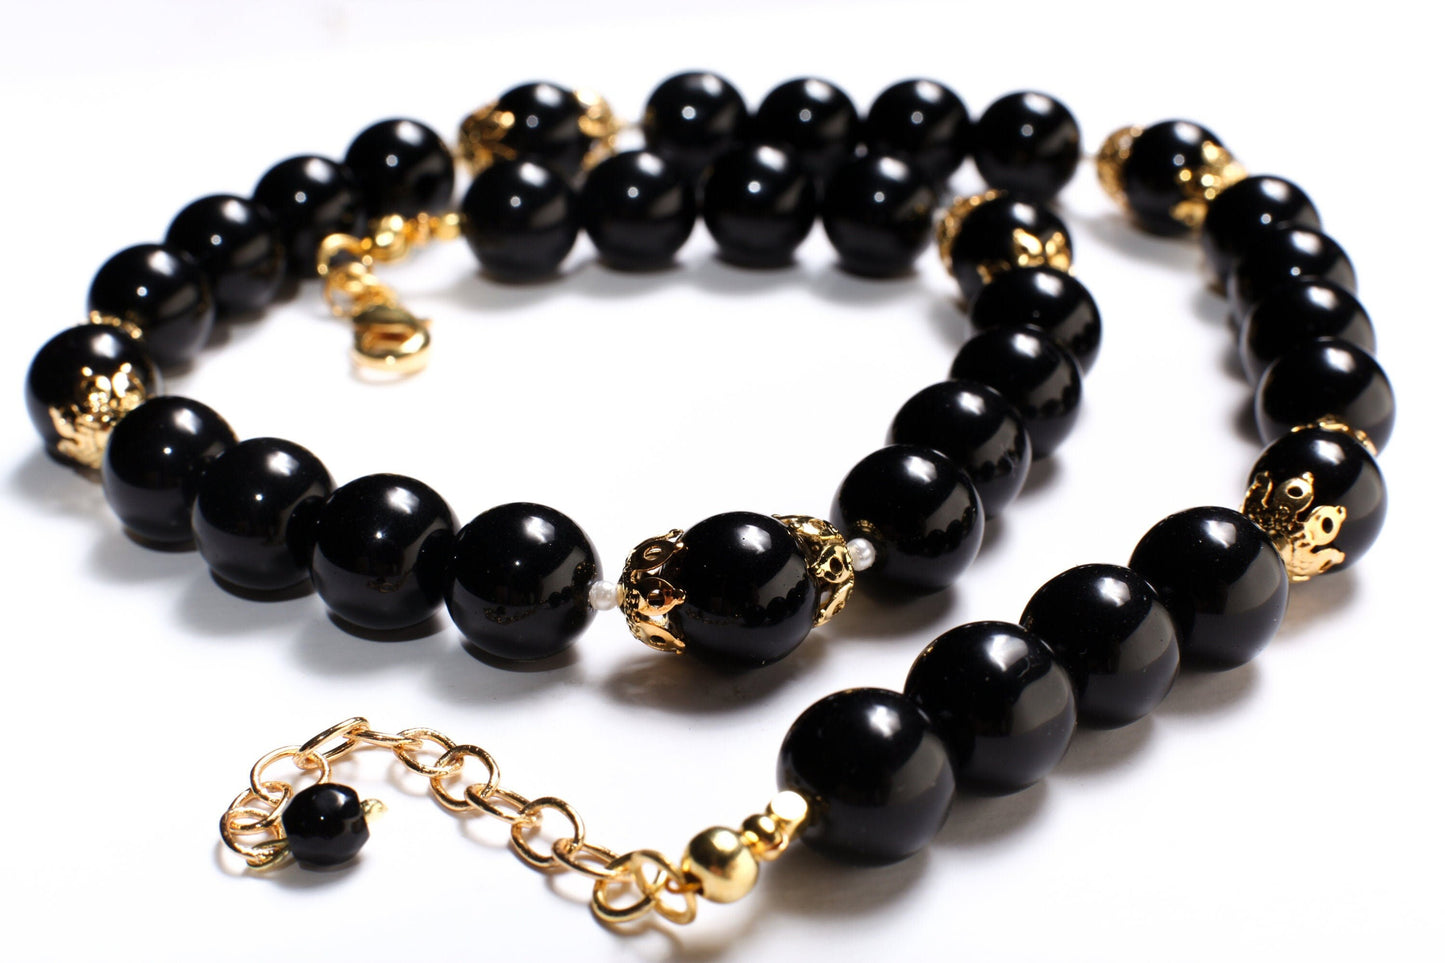 Black Onyx 12mm Round Beads with Freshwater Pearl Spacer Beads and 18K Gold Plated 20&quot; Necklace and 2&quot; Extension